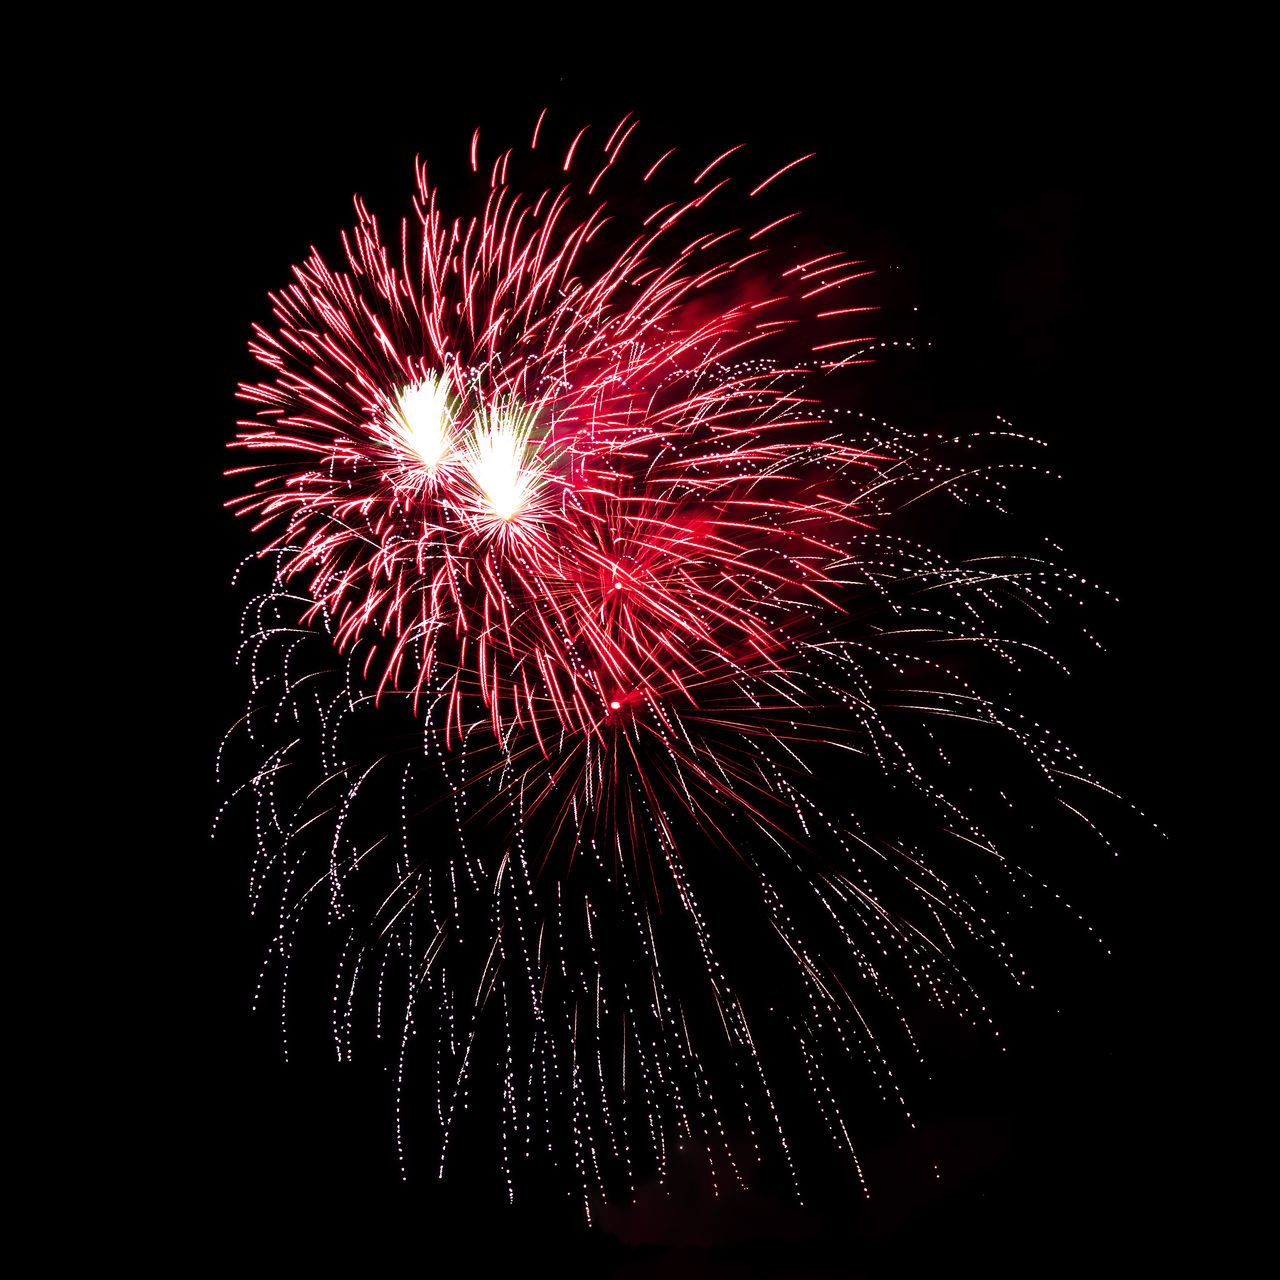 fireworks, celebration, firework display, motion, event, night, exploding, illuminated, arts culture and entertainment, glowing, recreation, low angle view, no people, sky, nature, firework - man made object, long exposure, blurred motion, multi colored, red, outdoors, dark